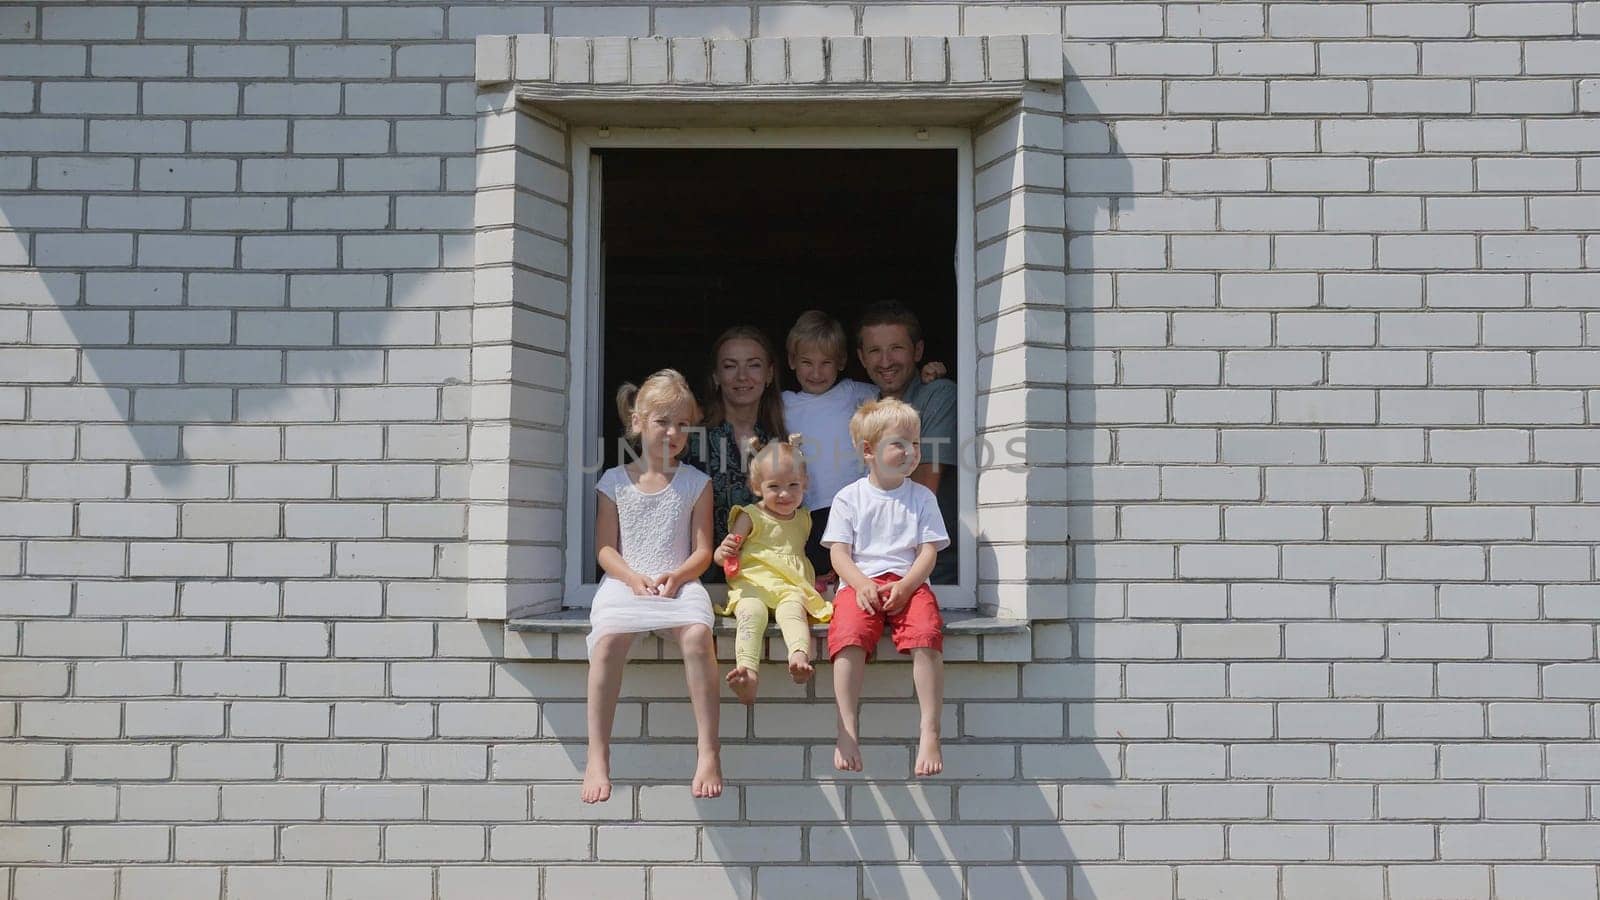 A friendly family appears in the window of their house. by DovidPro